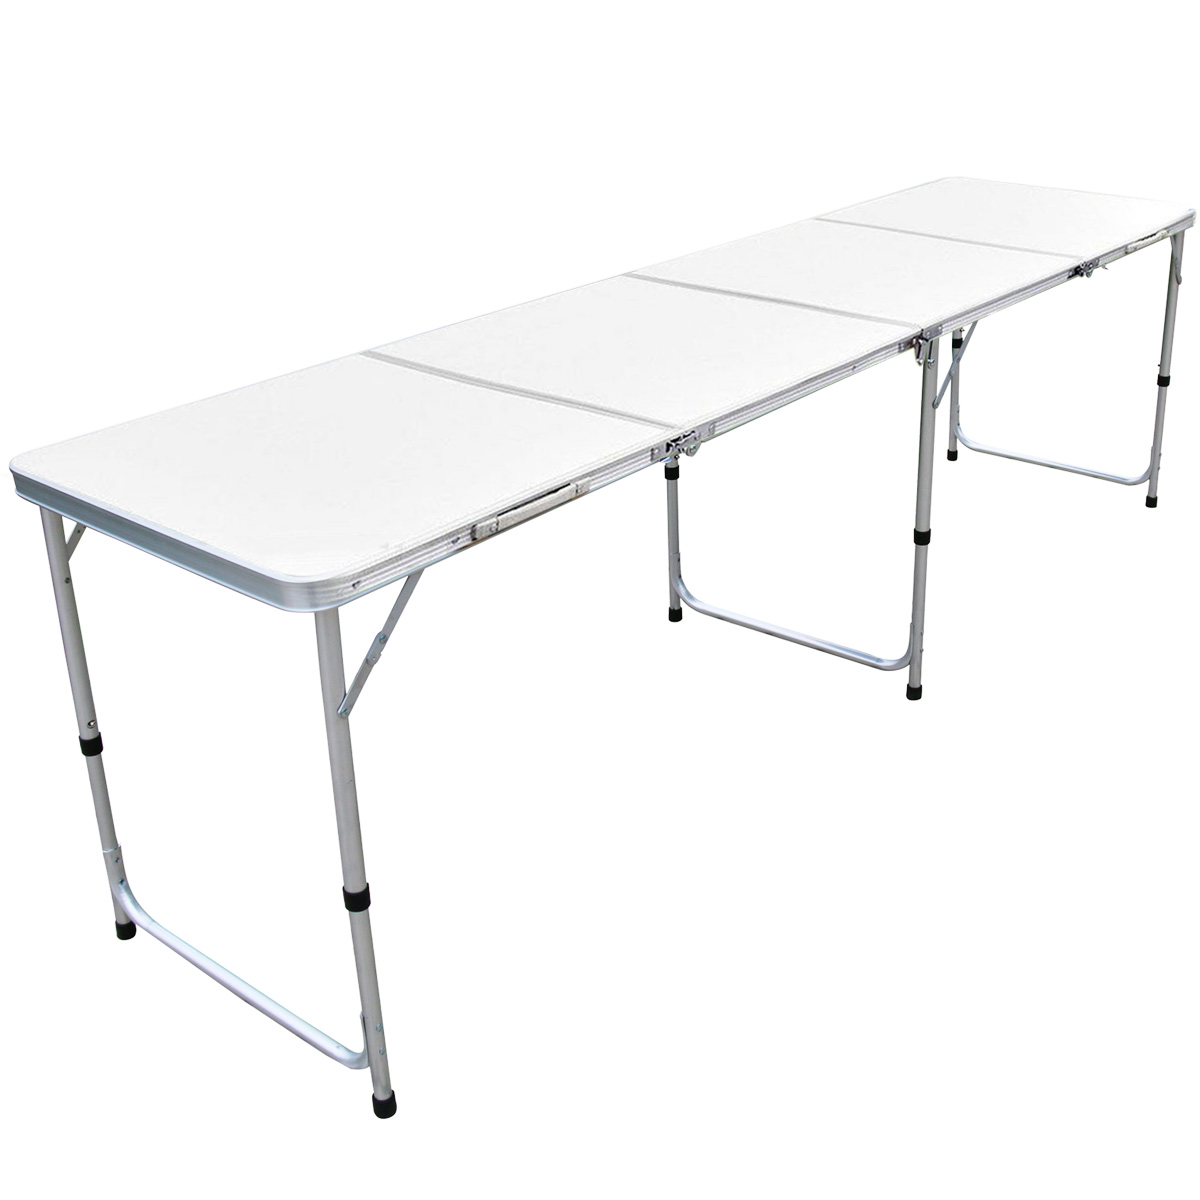 Folding Large Table Portable Camping Table Outdoor Picnic Garden Barbecue Aluminum Dining White Table